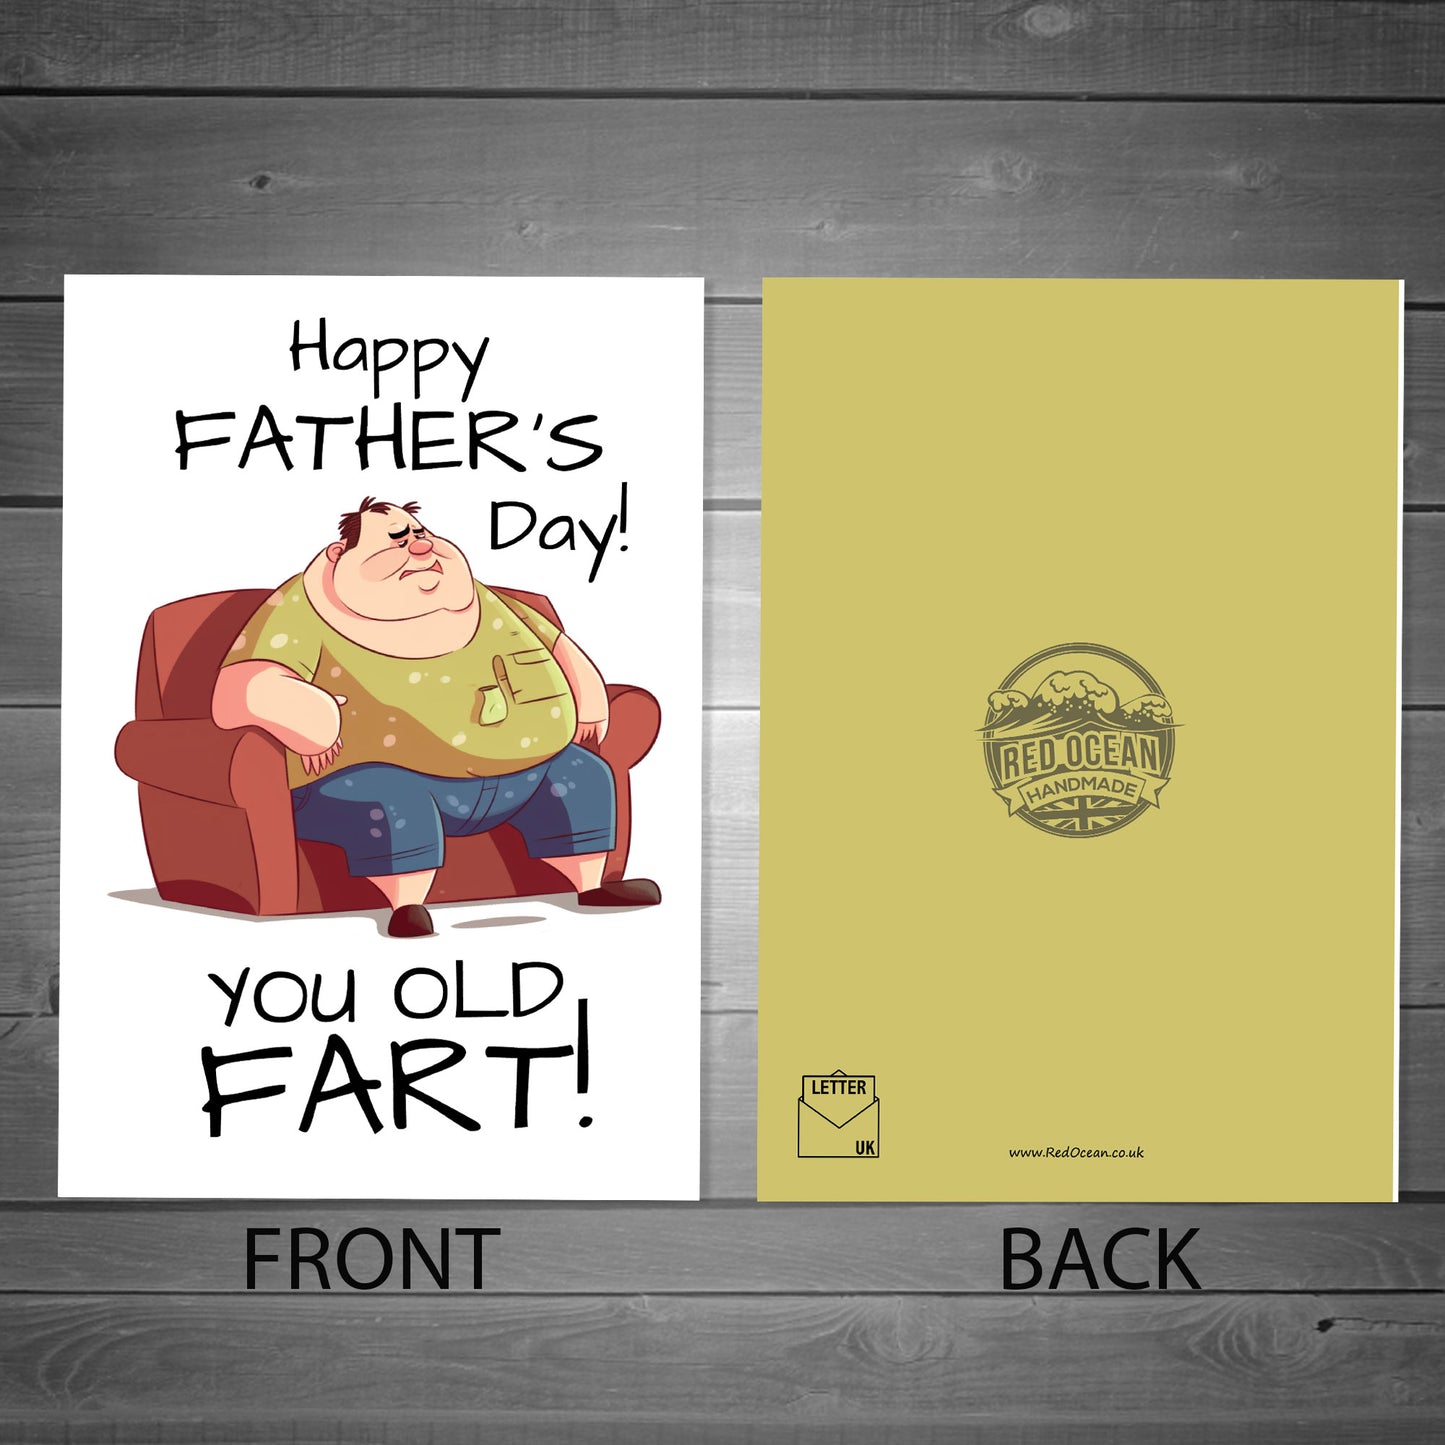 Funny Joke Fathers Day Card Gift For Dad FARTER Wood Heart